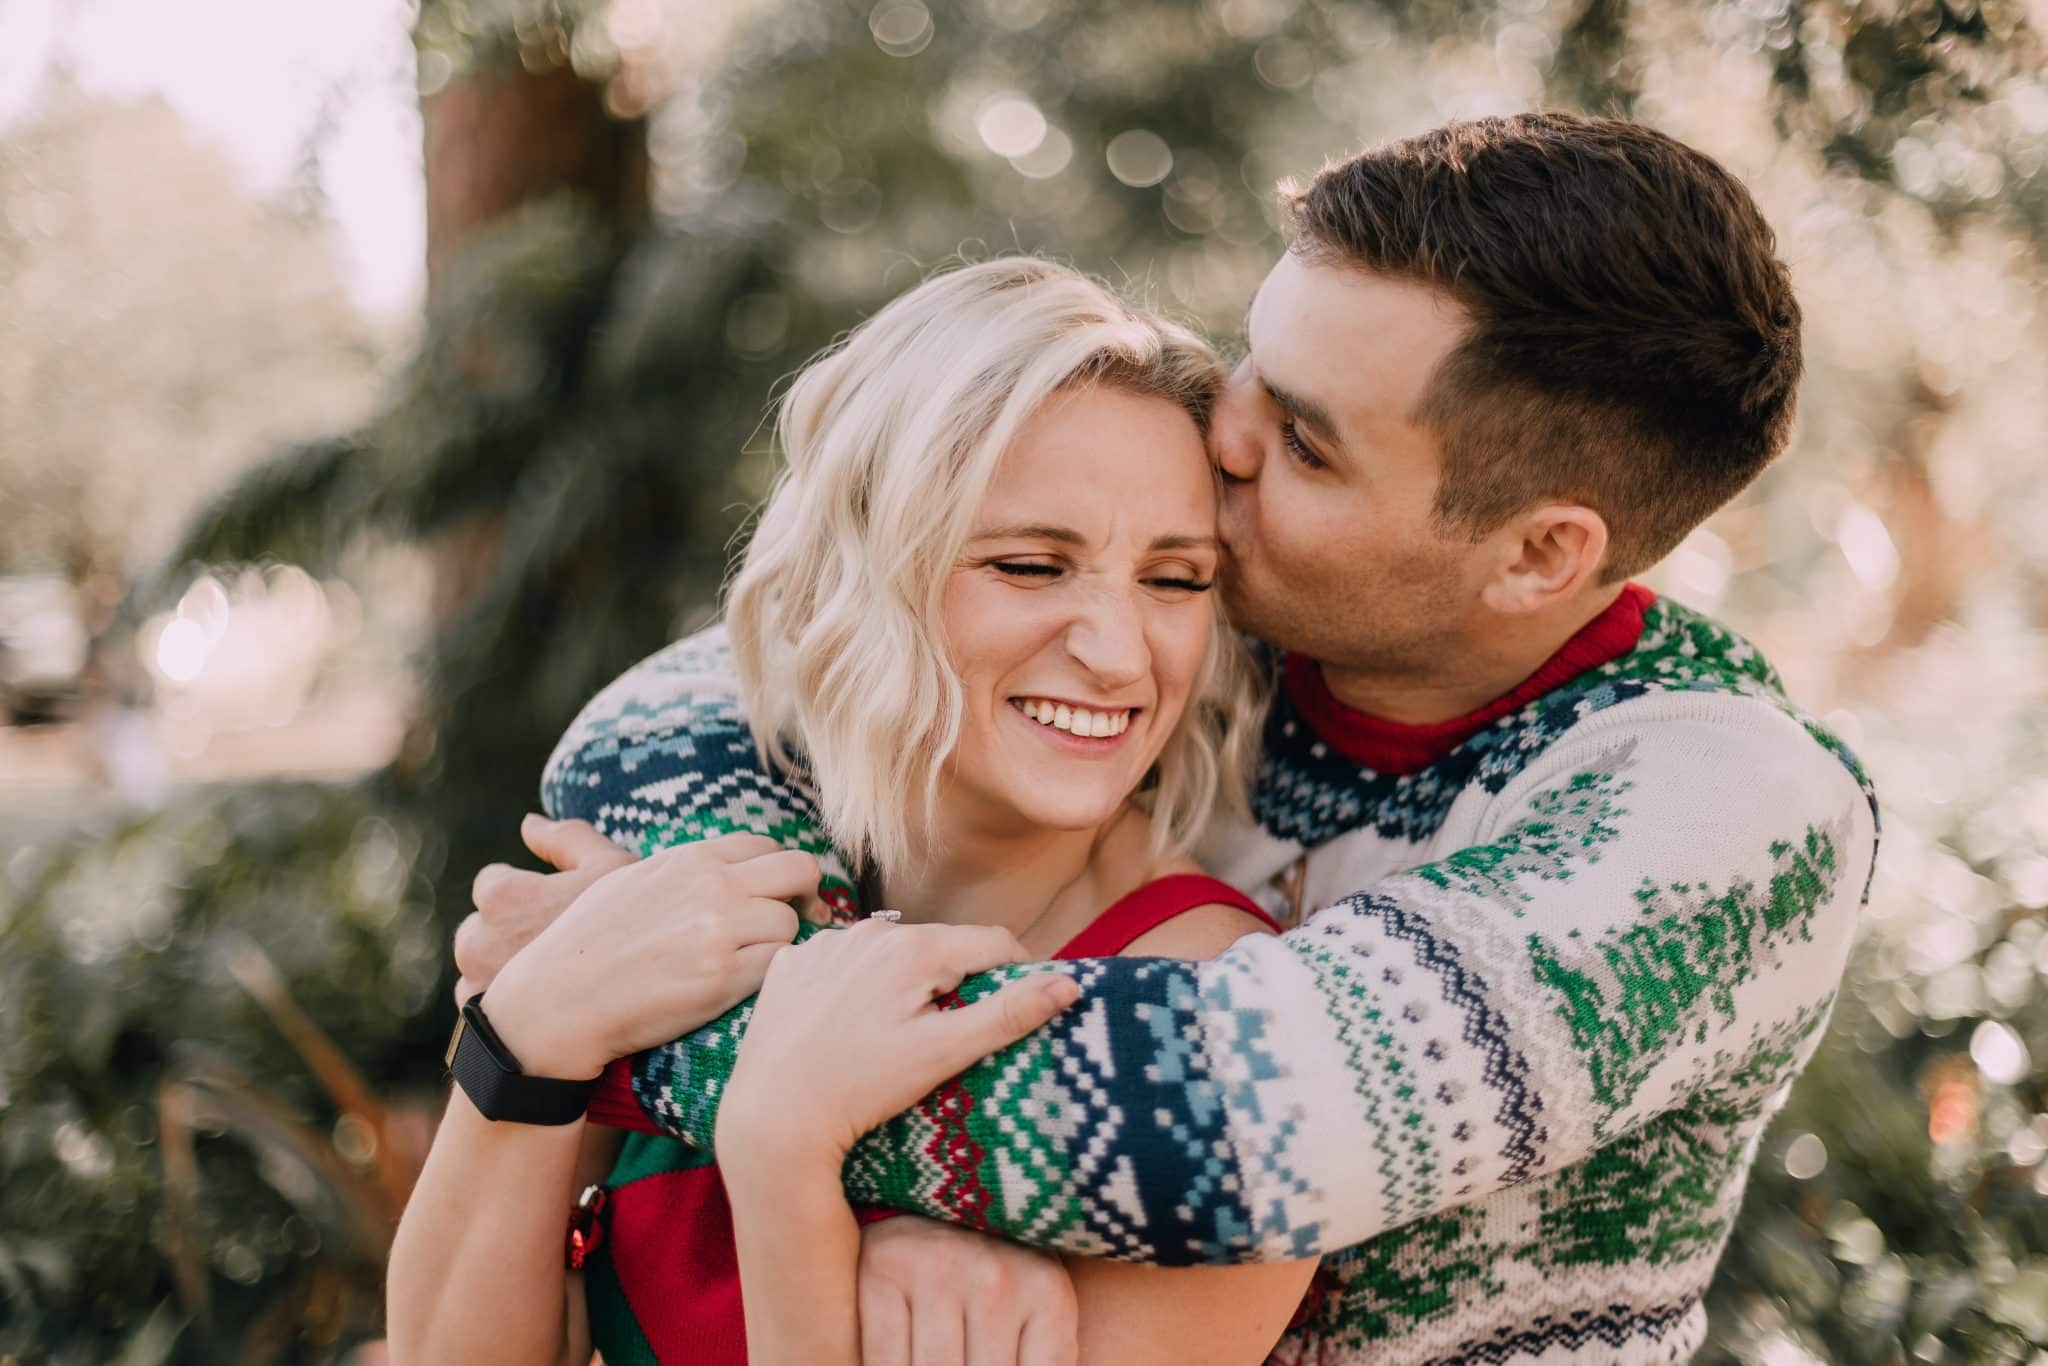 couple embraces in holiday attire